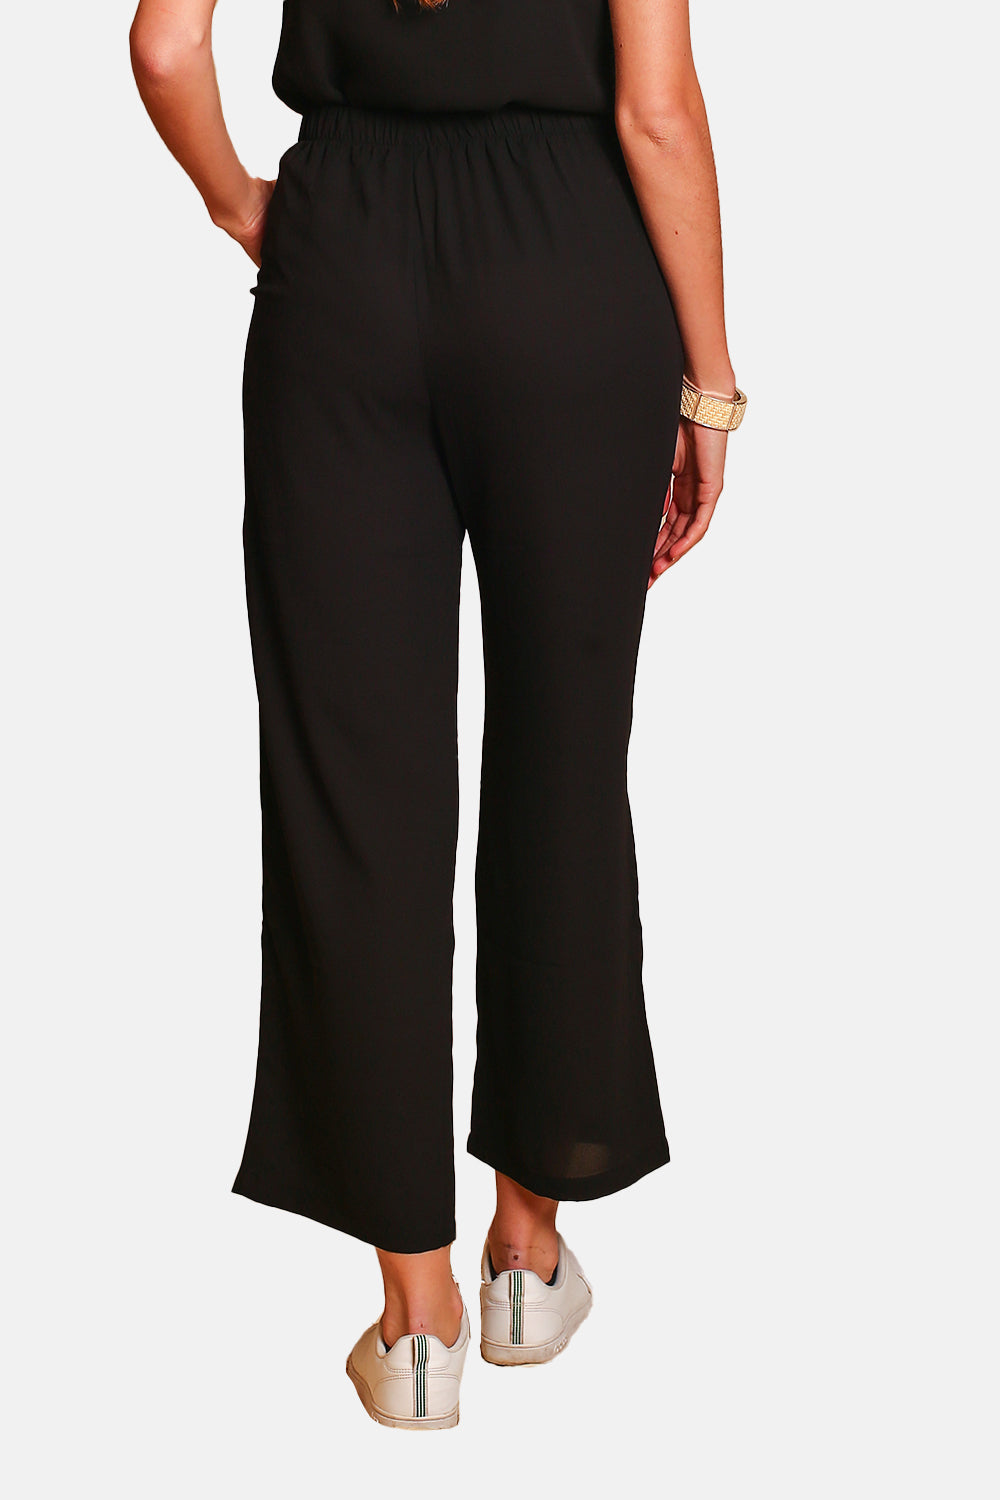 Top with thin straps and Wide satin pants